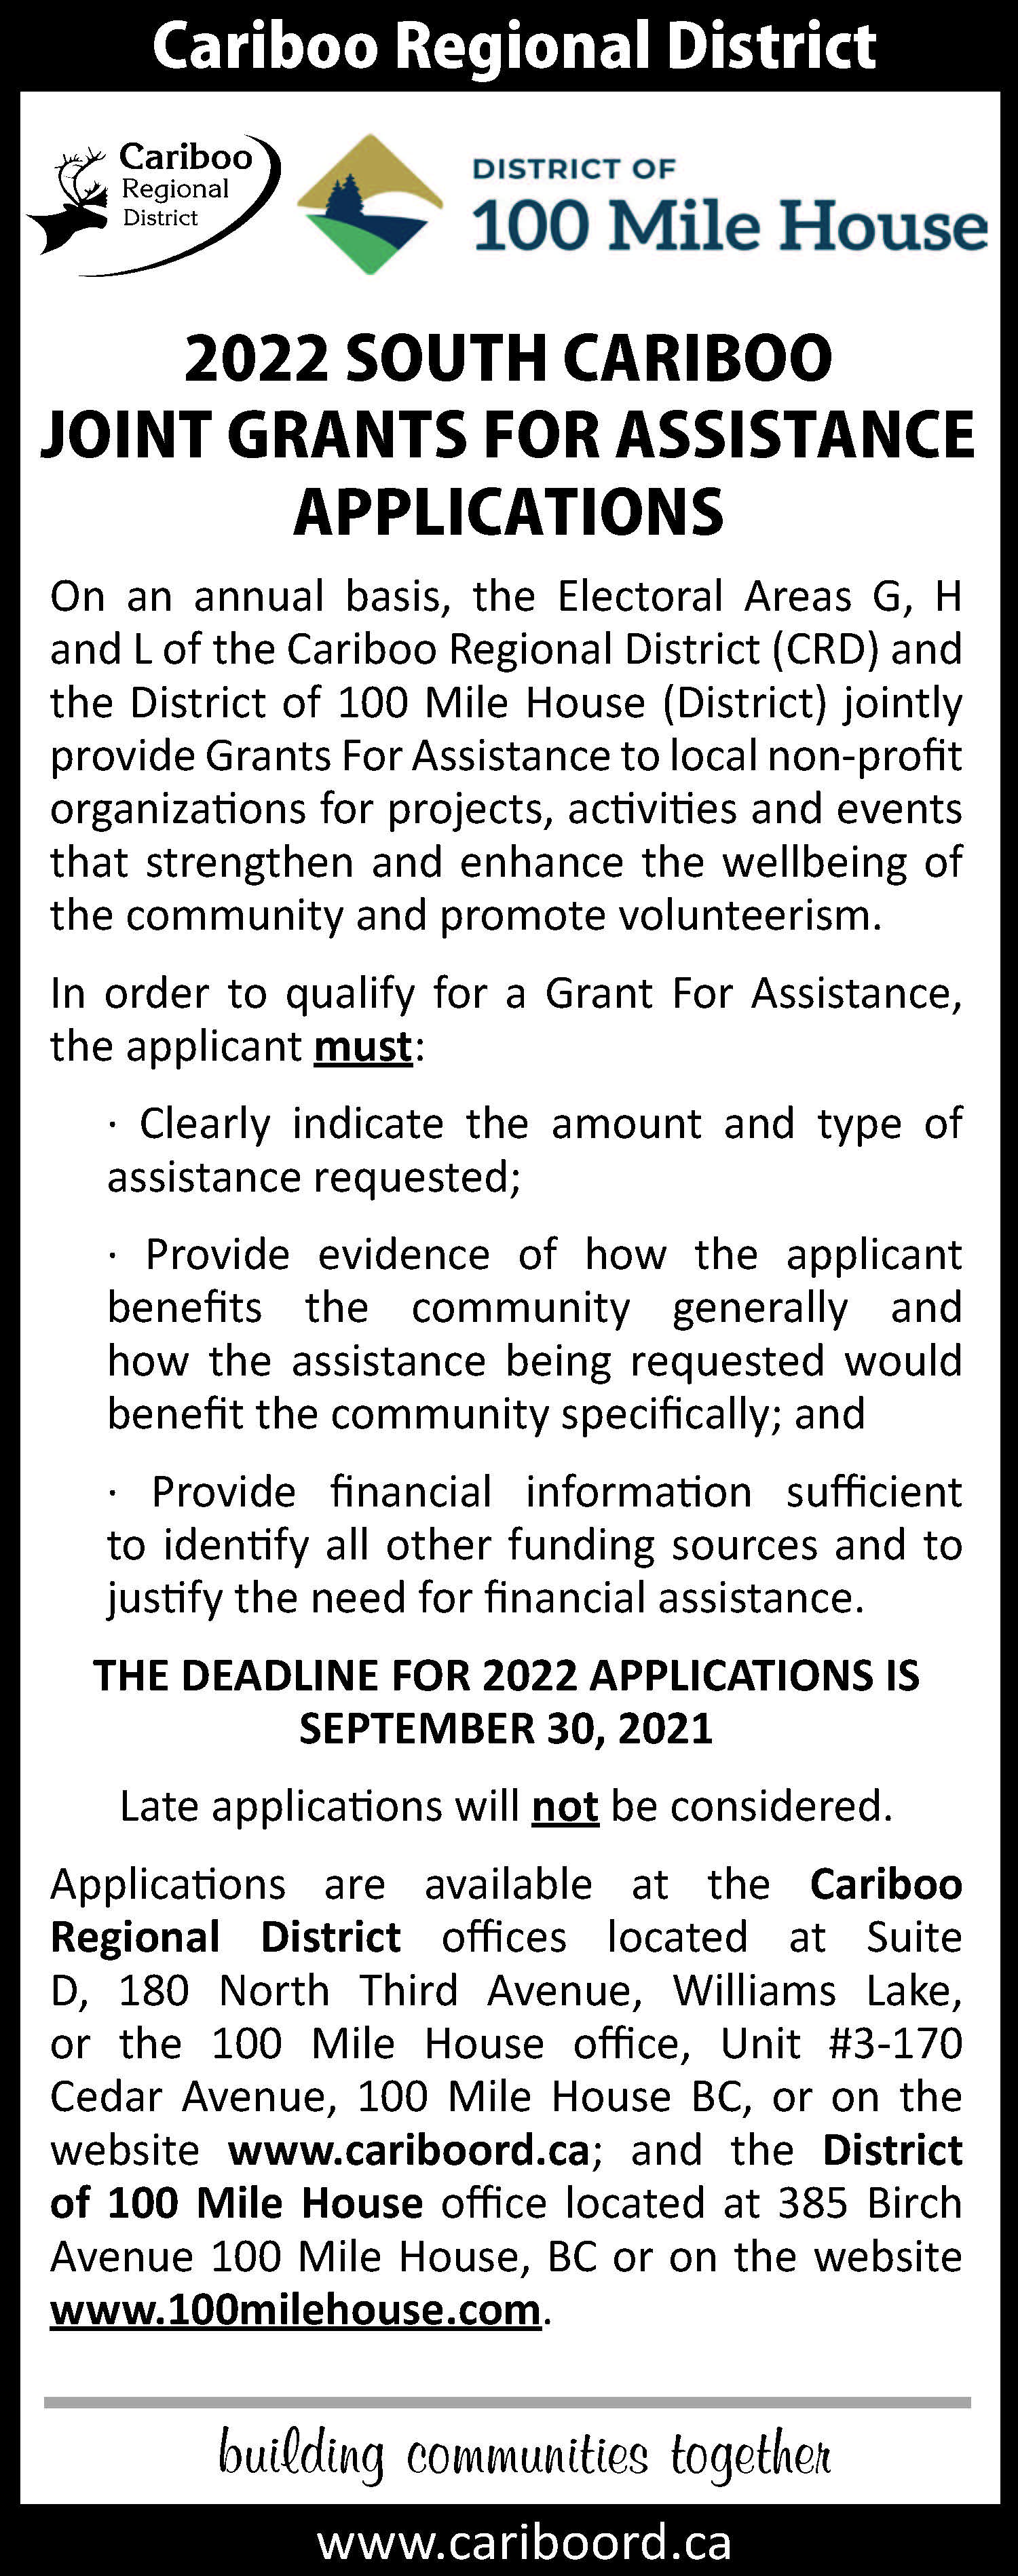 2022 Grant for Assistance